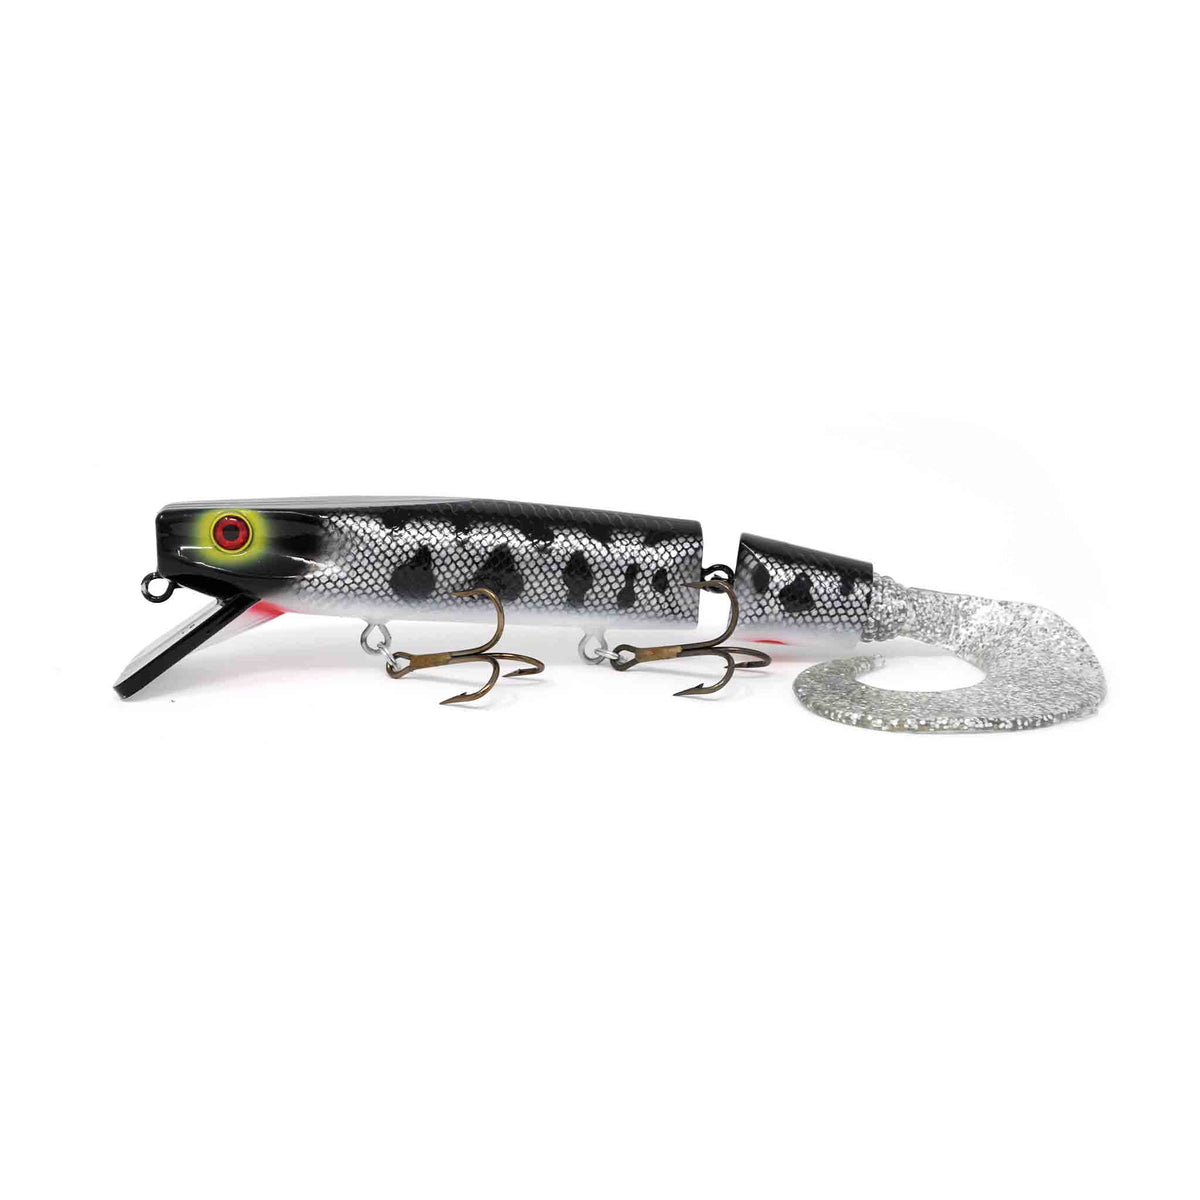 Hadden Outdoors - 🤫🤫🤫 IYKYK! One of the hottest baits